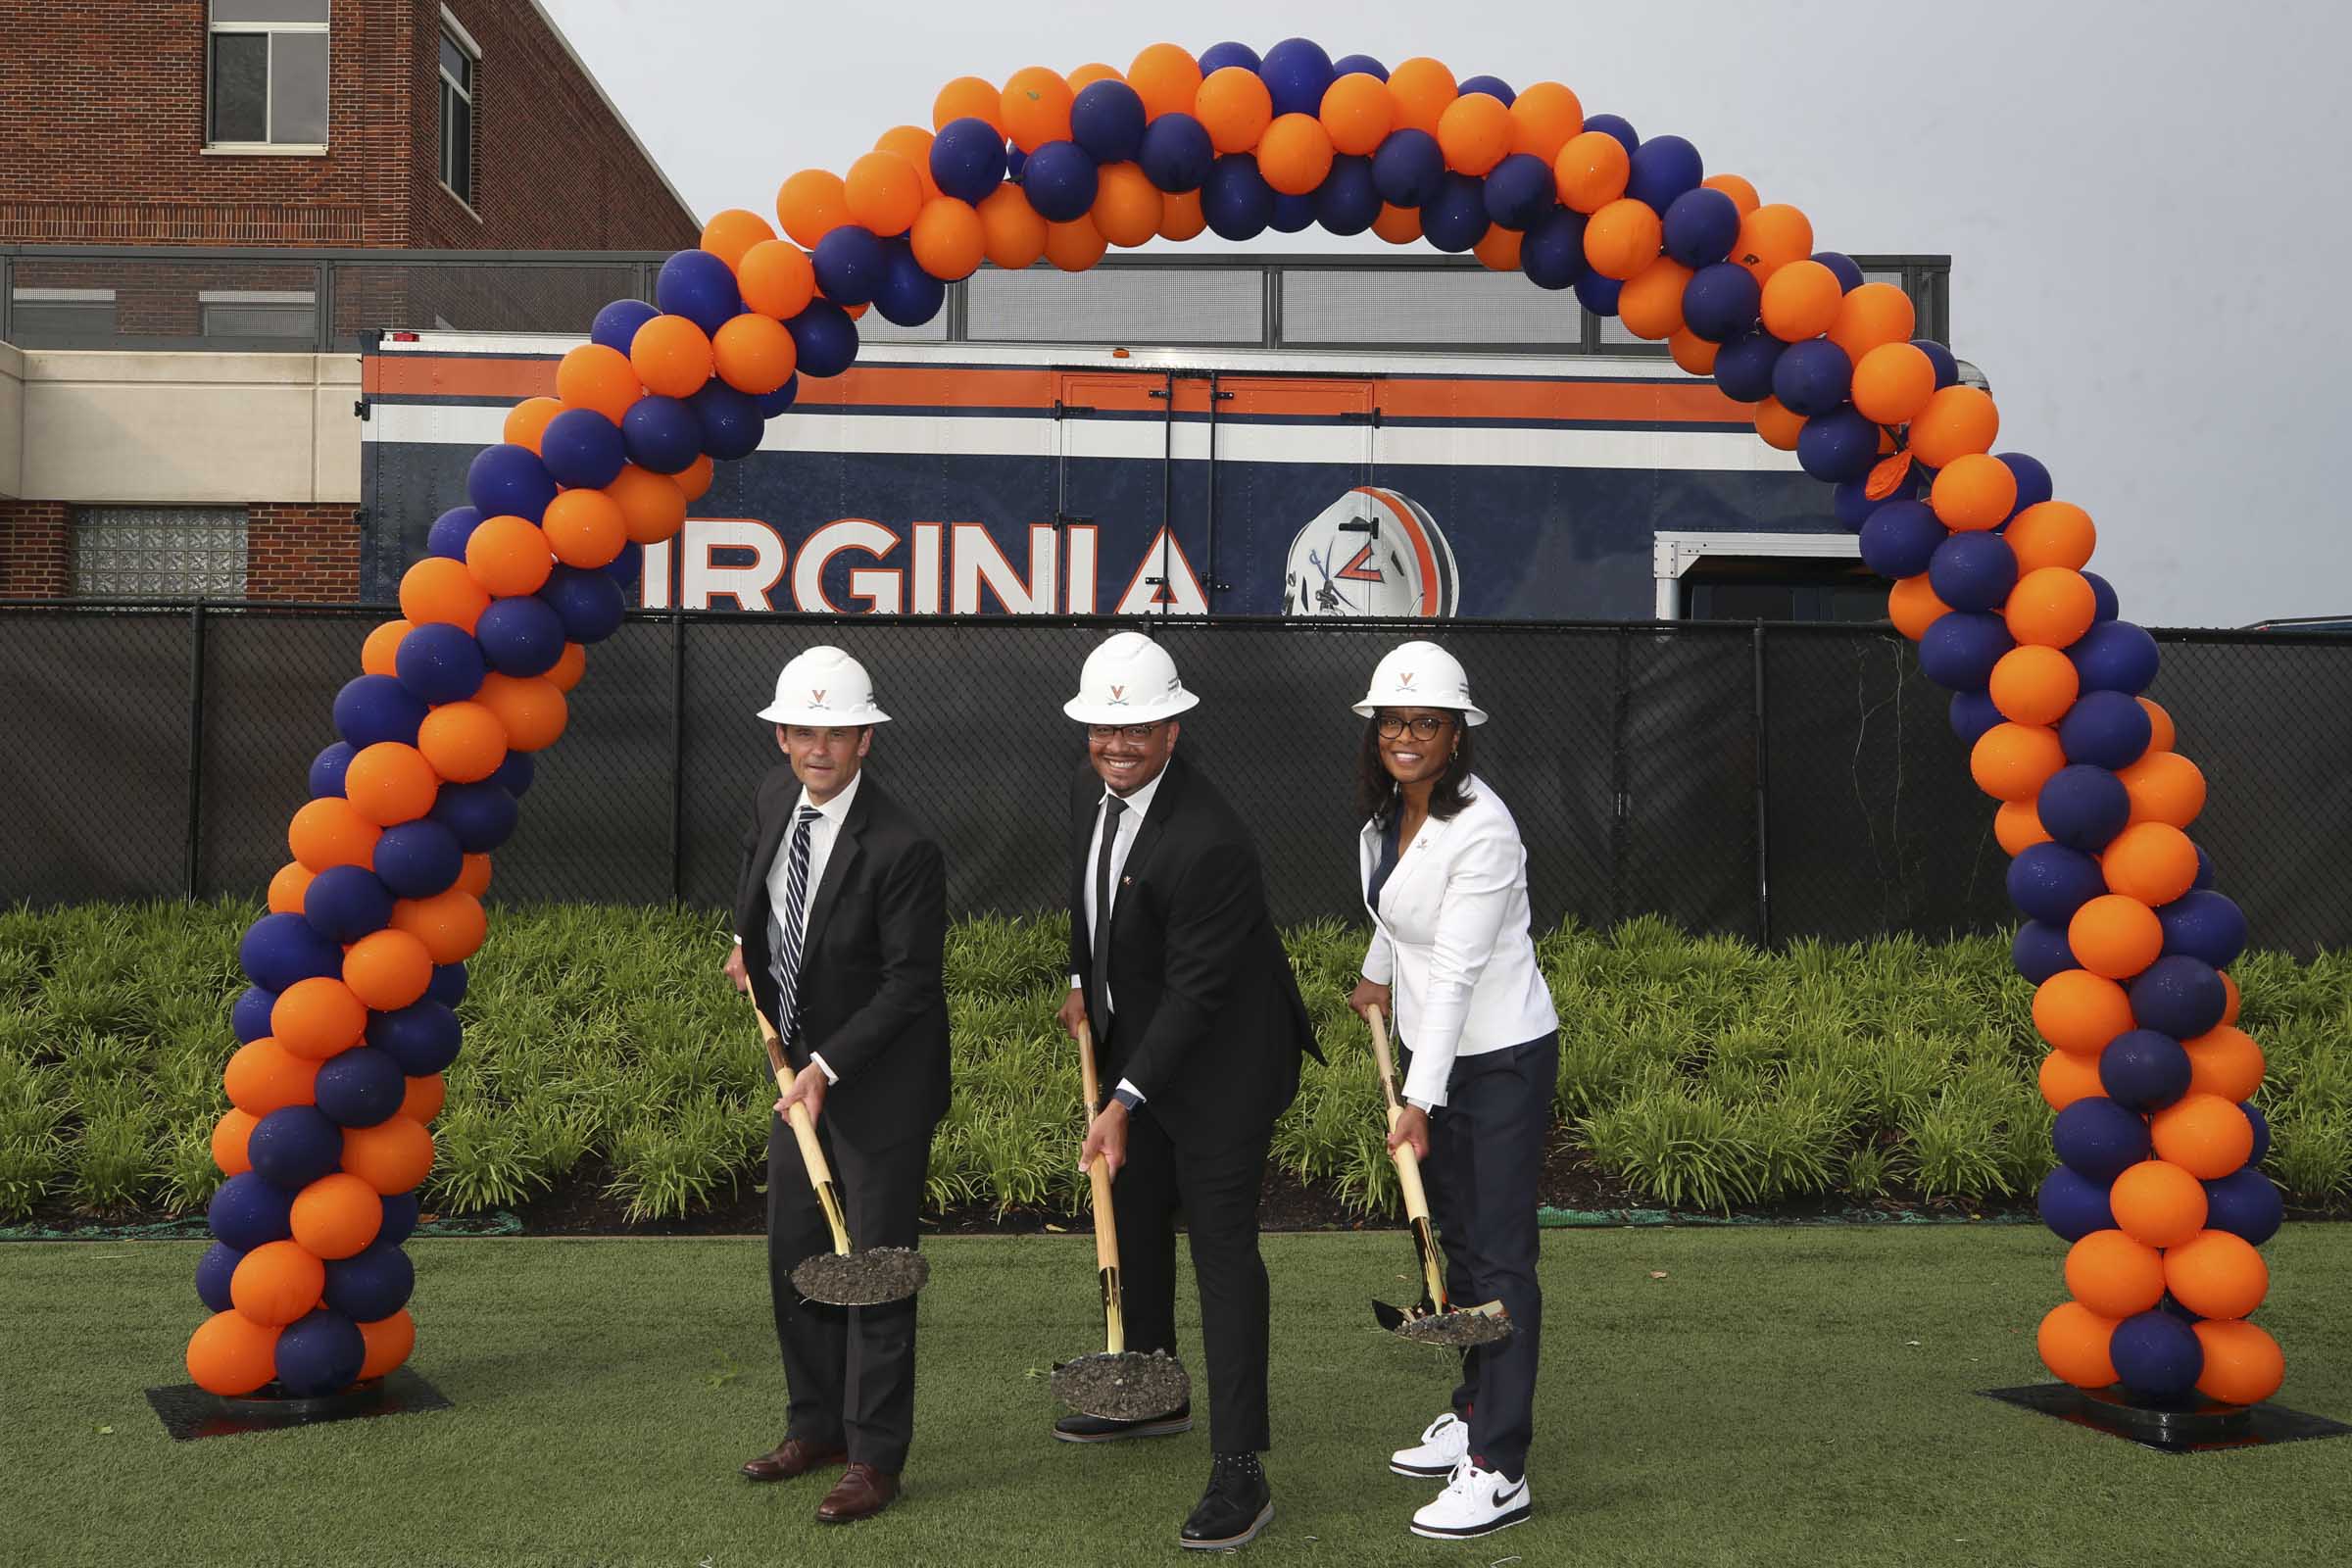 Three people in hard hats pose with shovels under a blue and orange balloon arch